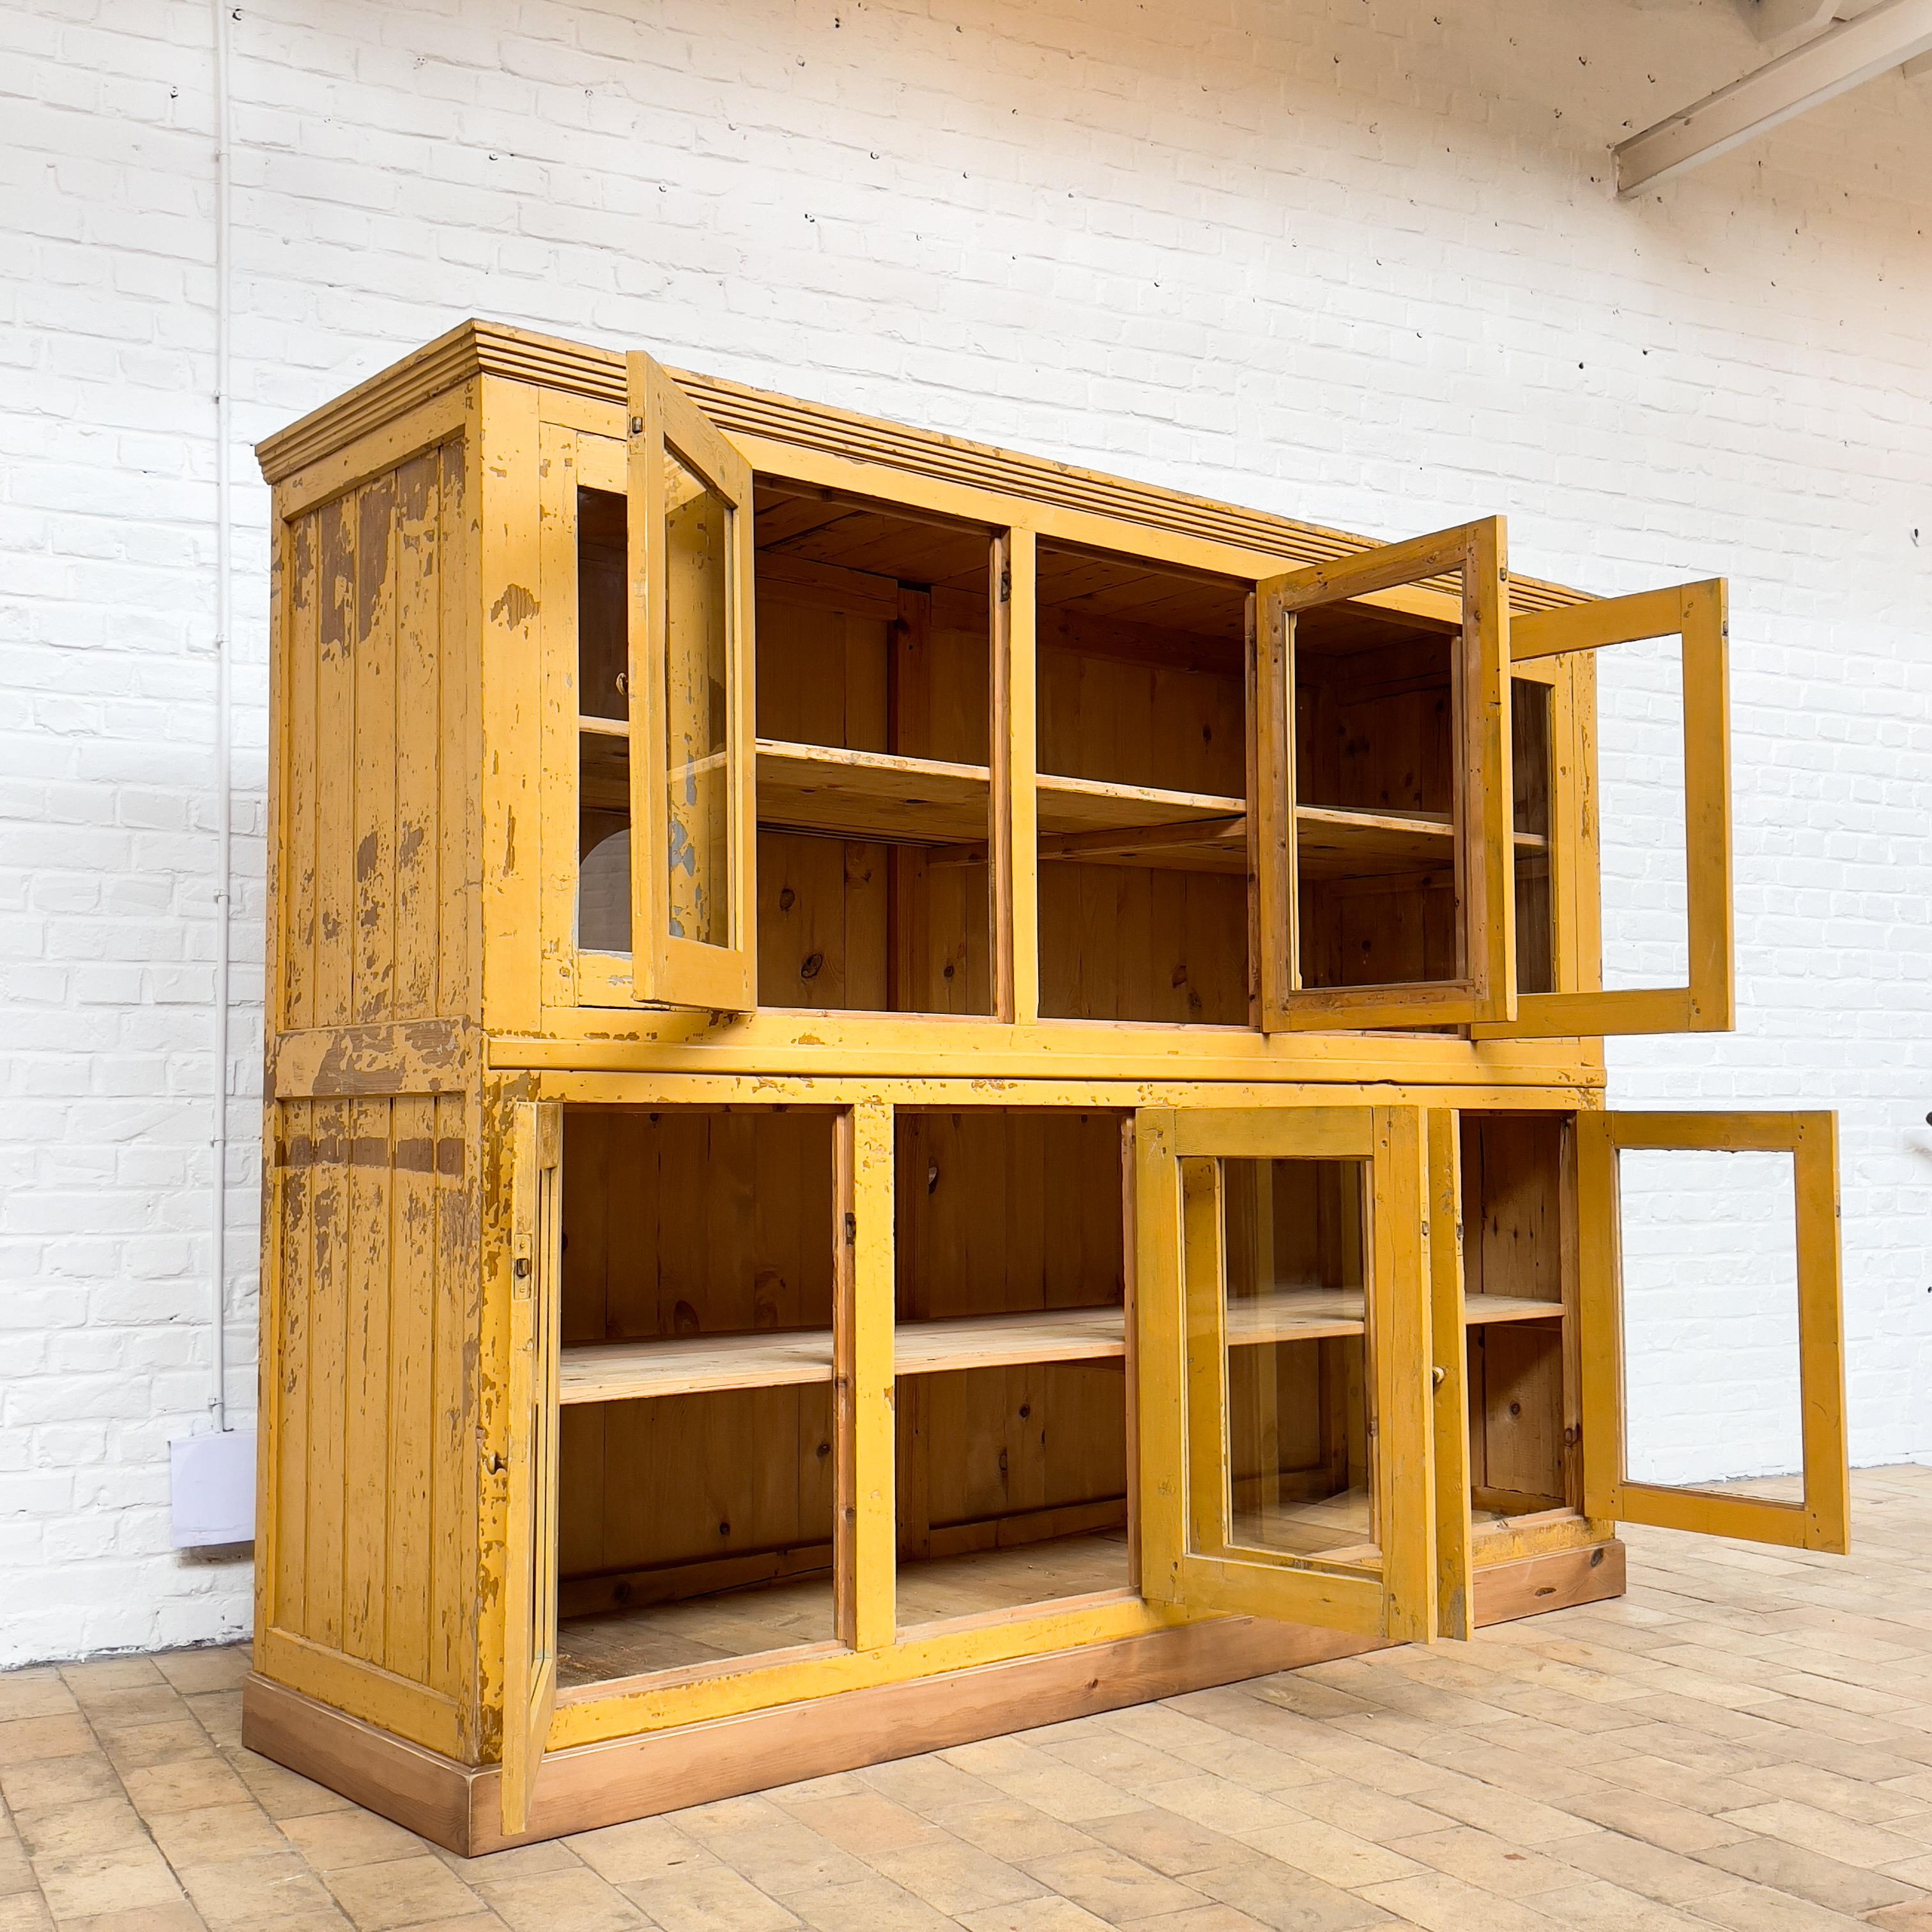 French wooden showcase C.1930
Furniture from butcher
Original patina preserved
7 glass doors
Interior wooden shelves
Good condition.